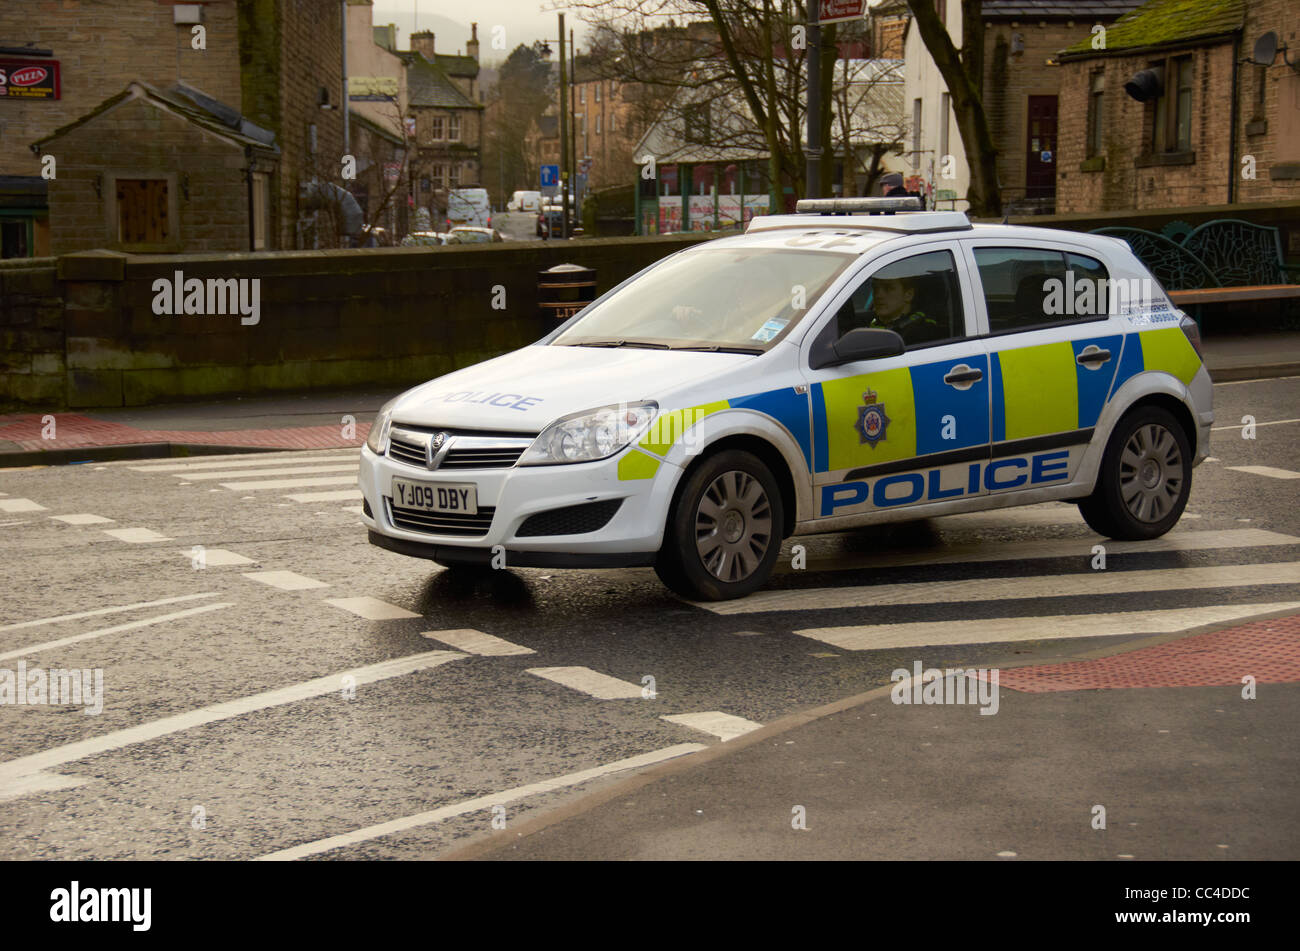 Police car on the street in Holmfirth. Stock Photo